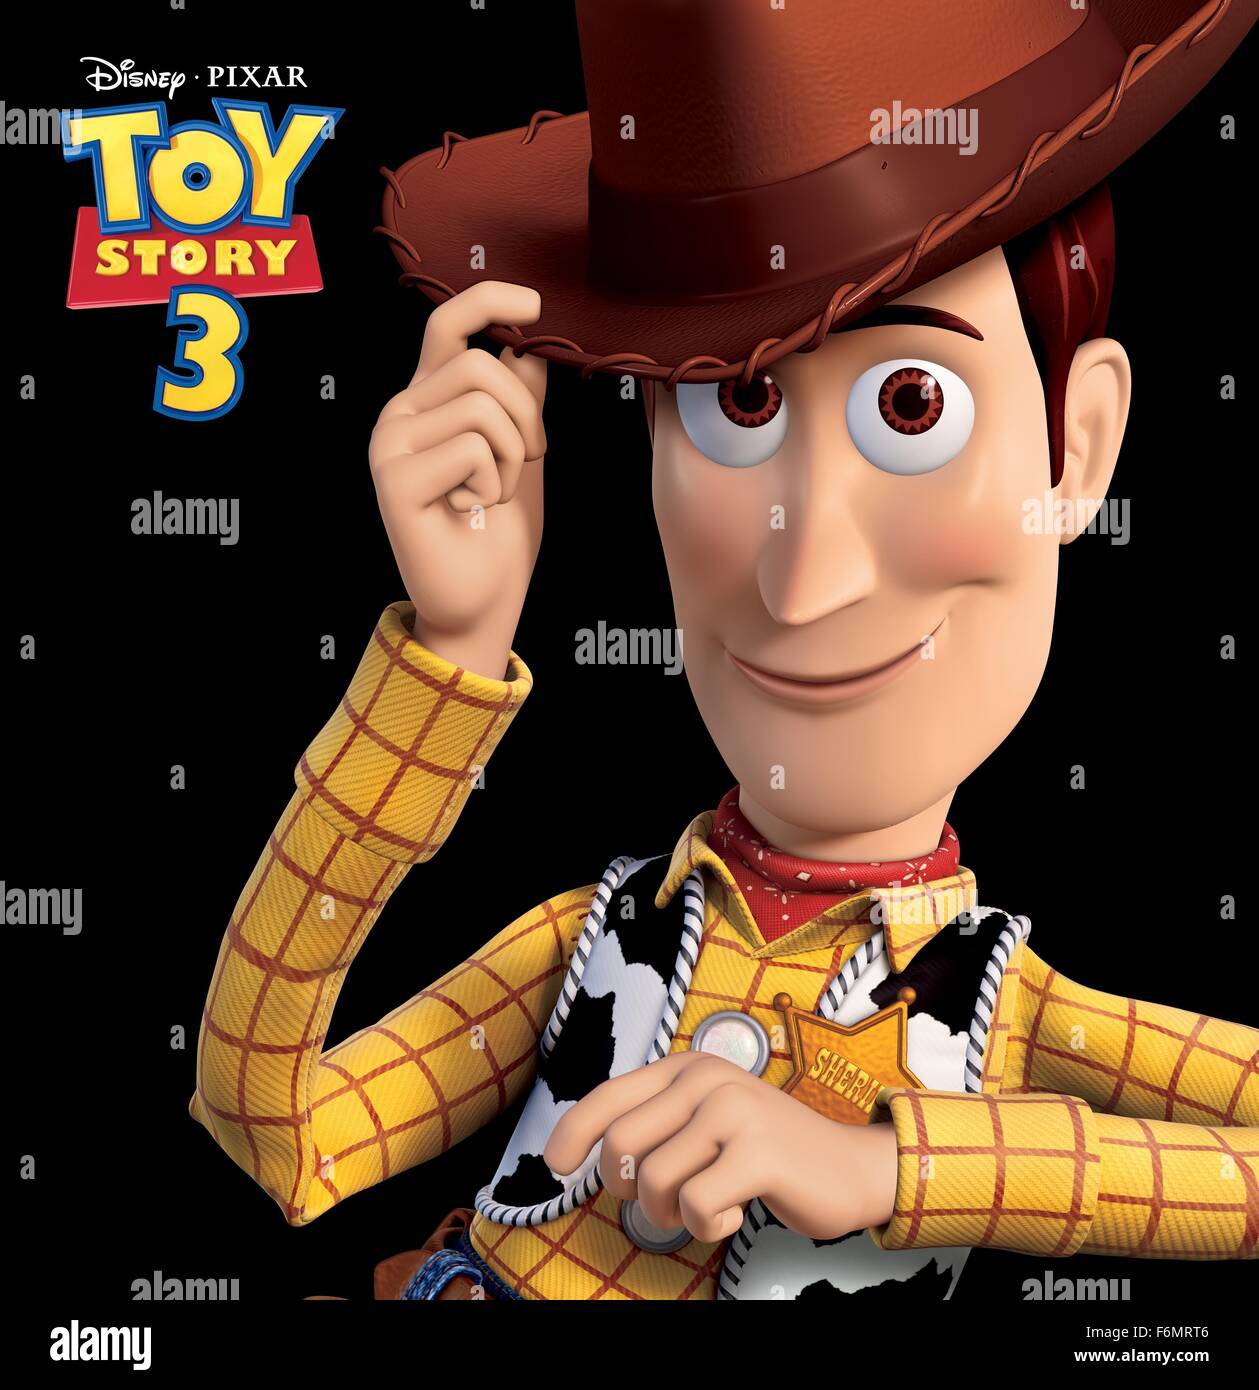 RELEASE DATE: June 18, 2010   MOVIE TITLE: Toy Story 3   STUDIO: Disney Pixar   DIRECTOR: Lee Unkrich   PLOT: Woody, Buzz, and the rest of their toy-box friends are dumped in a day-care center after their owner, Andy, departs for college   PICTURED: Woody   (Credit Image: c Disney Pixar/Entertainment Pictures) Stock Photo